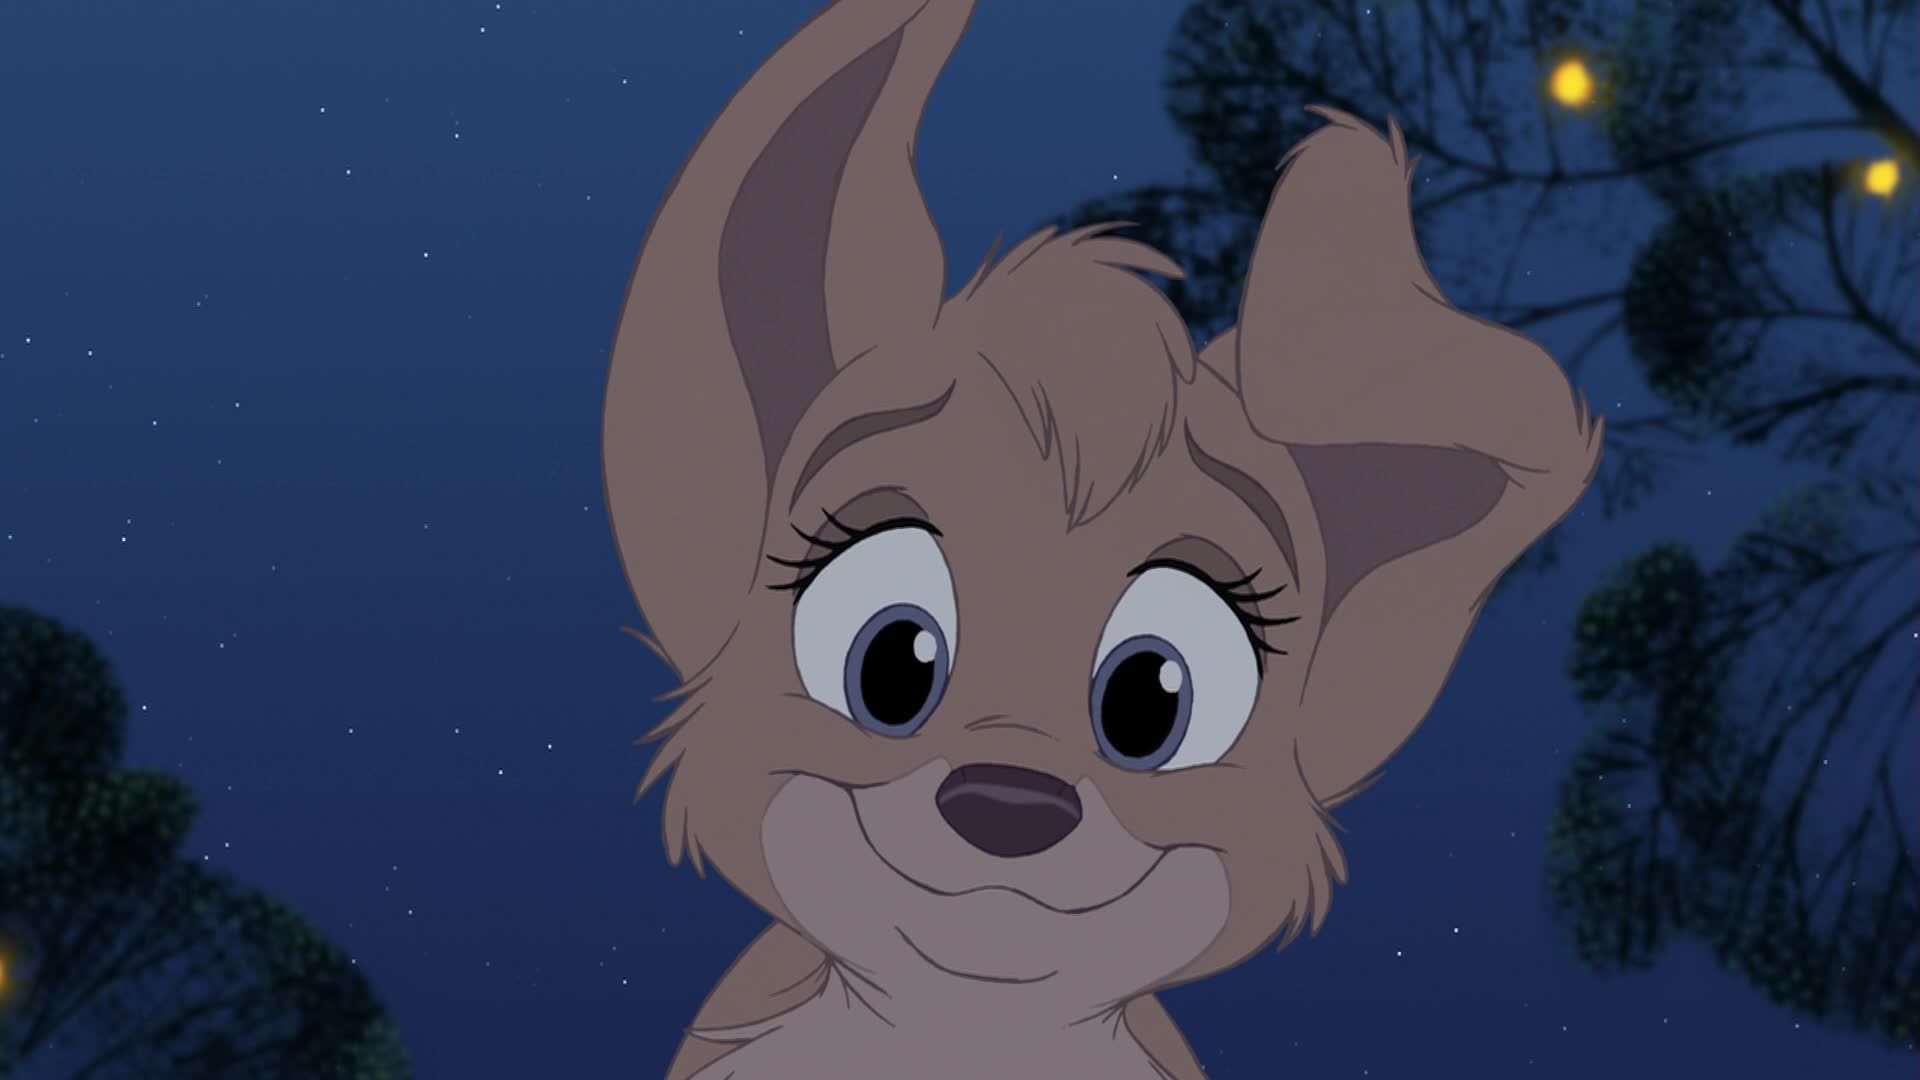 Angel from lady and the tramp